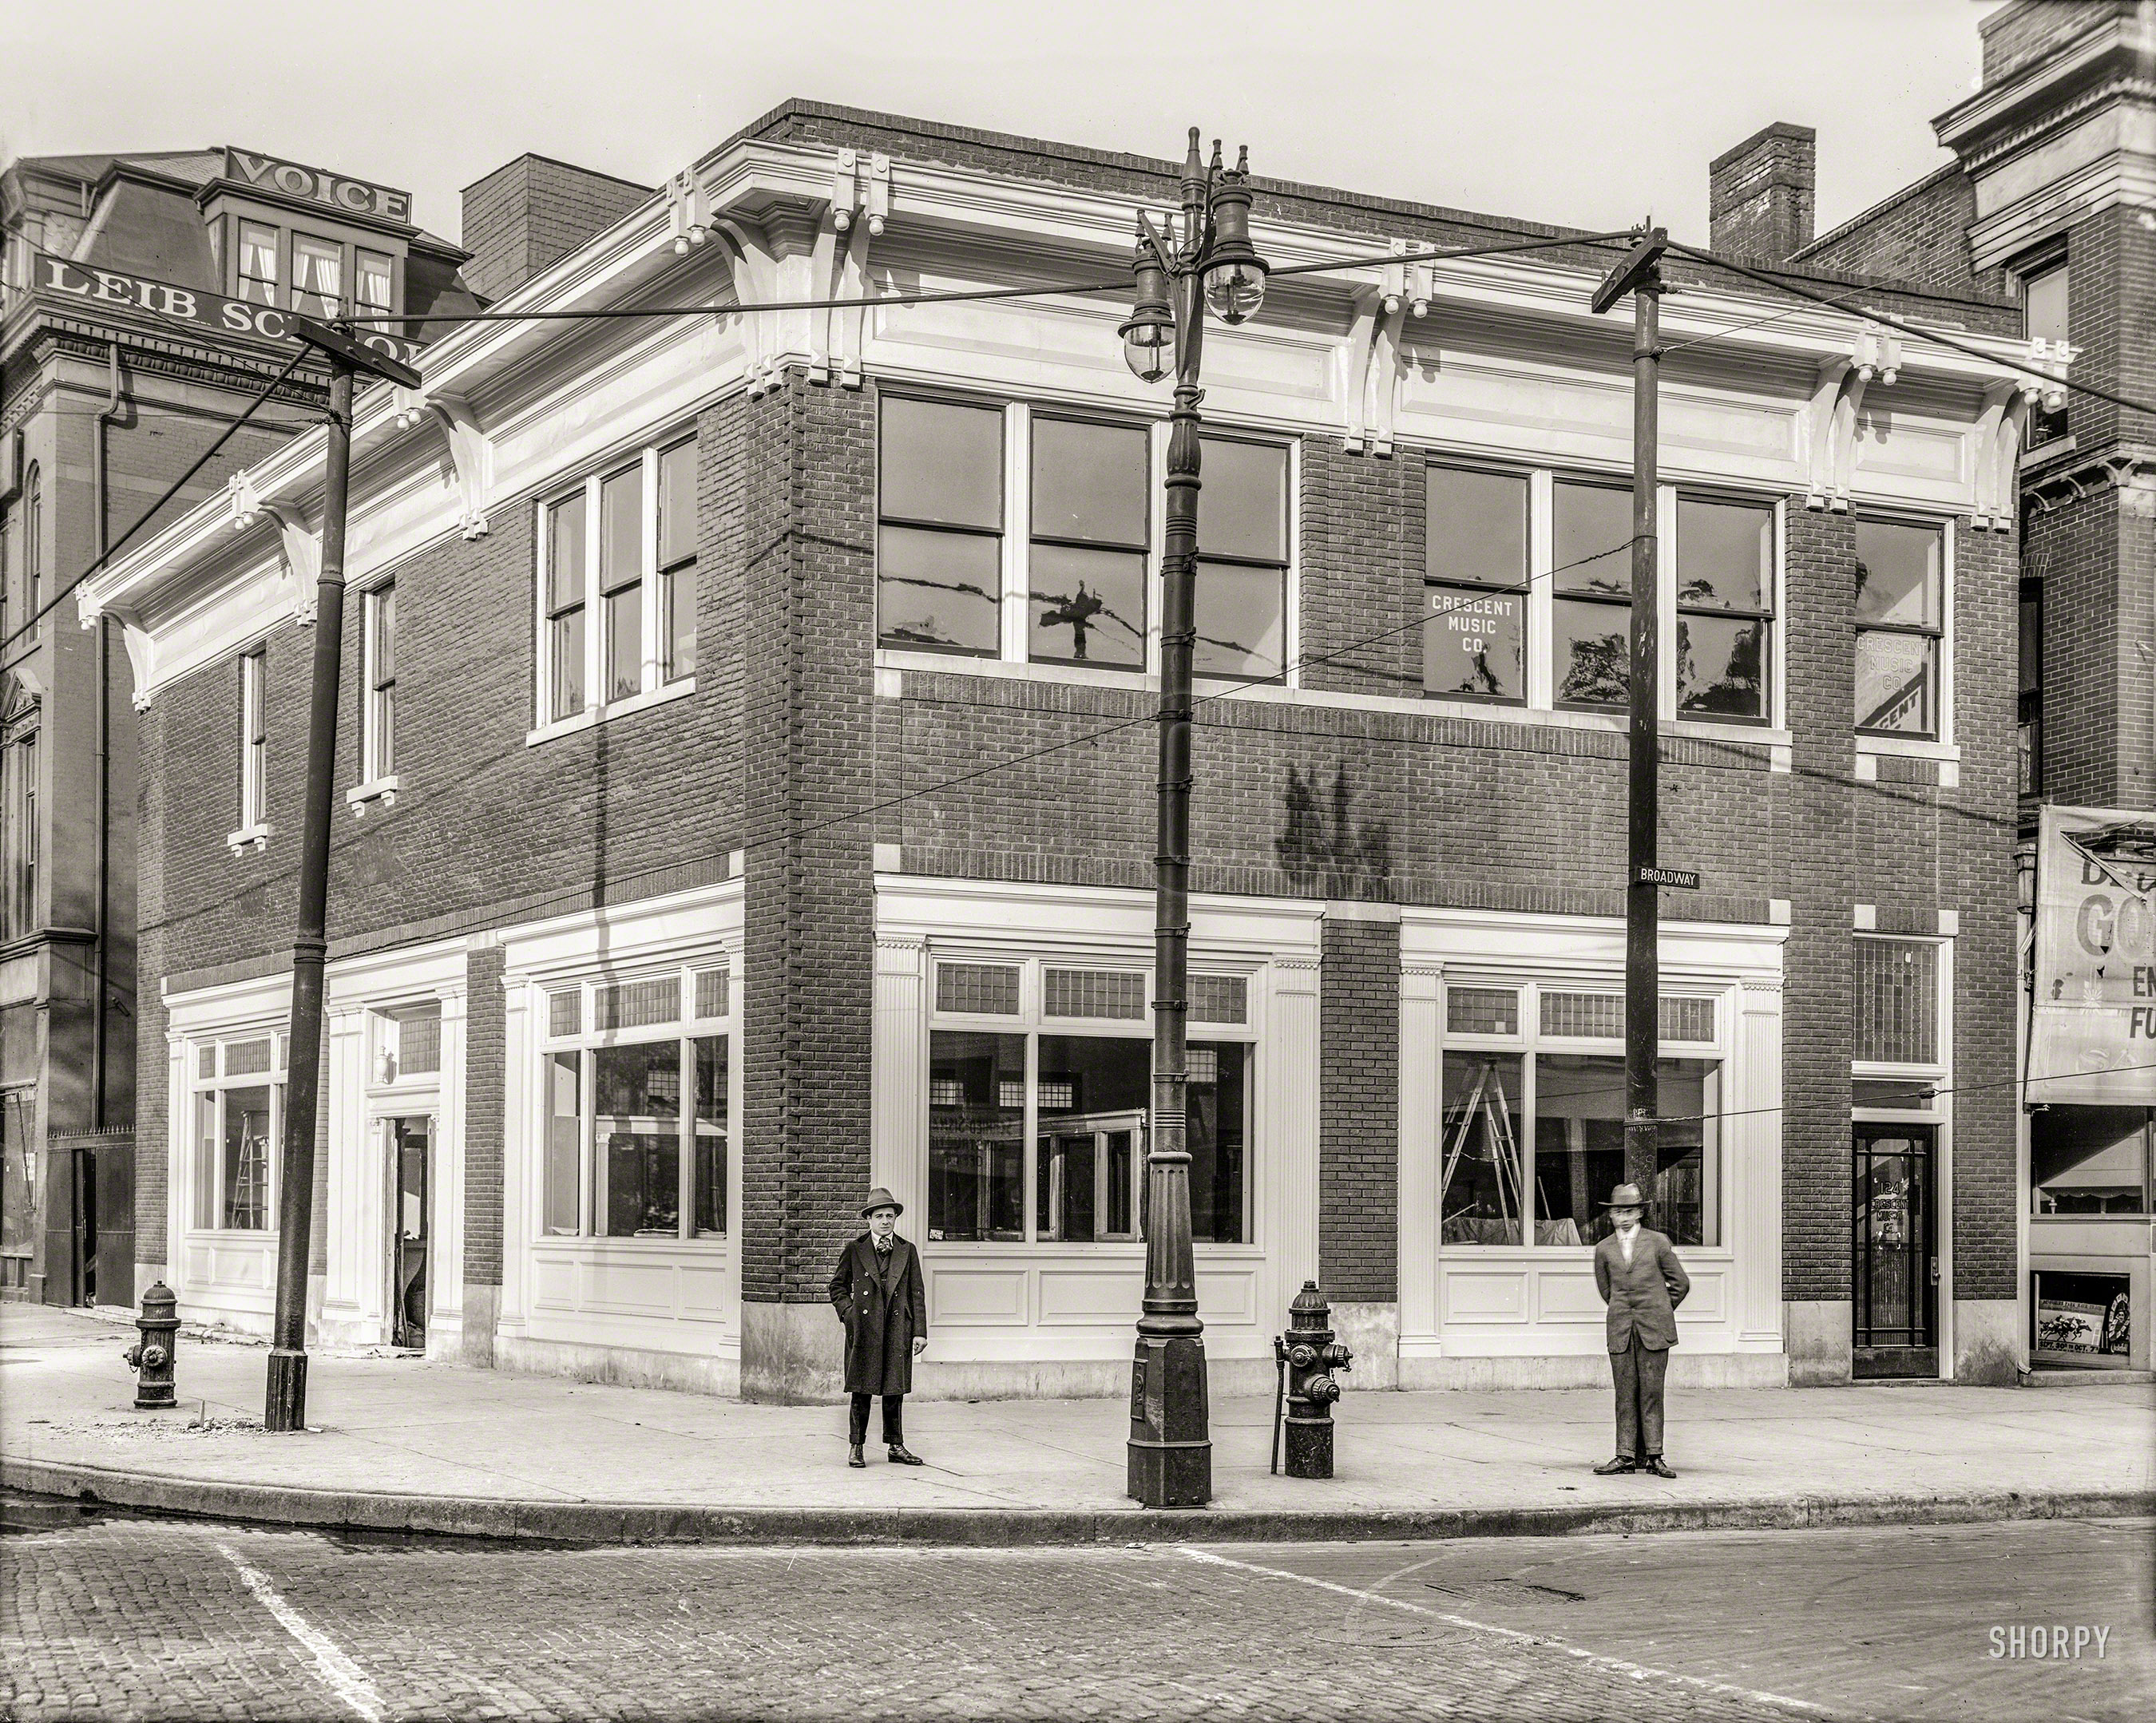 Detroit circa 1916. "Dime Bank branch, Broadway & Grand Circus Park." Co-starring the Crescent Music Co. and a fine-looking carbon-arc streetlight. 8x10 inch dry plate glass negative, Detroit Publishing Company. View full size.